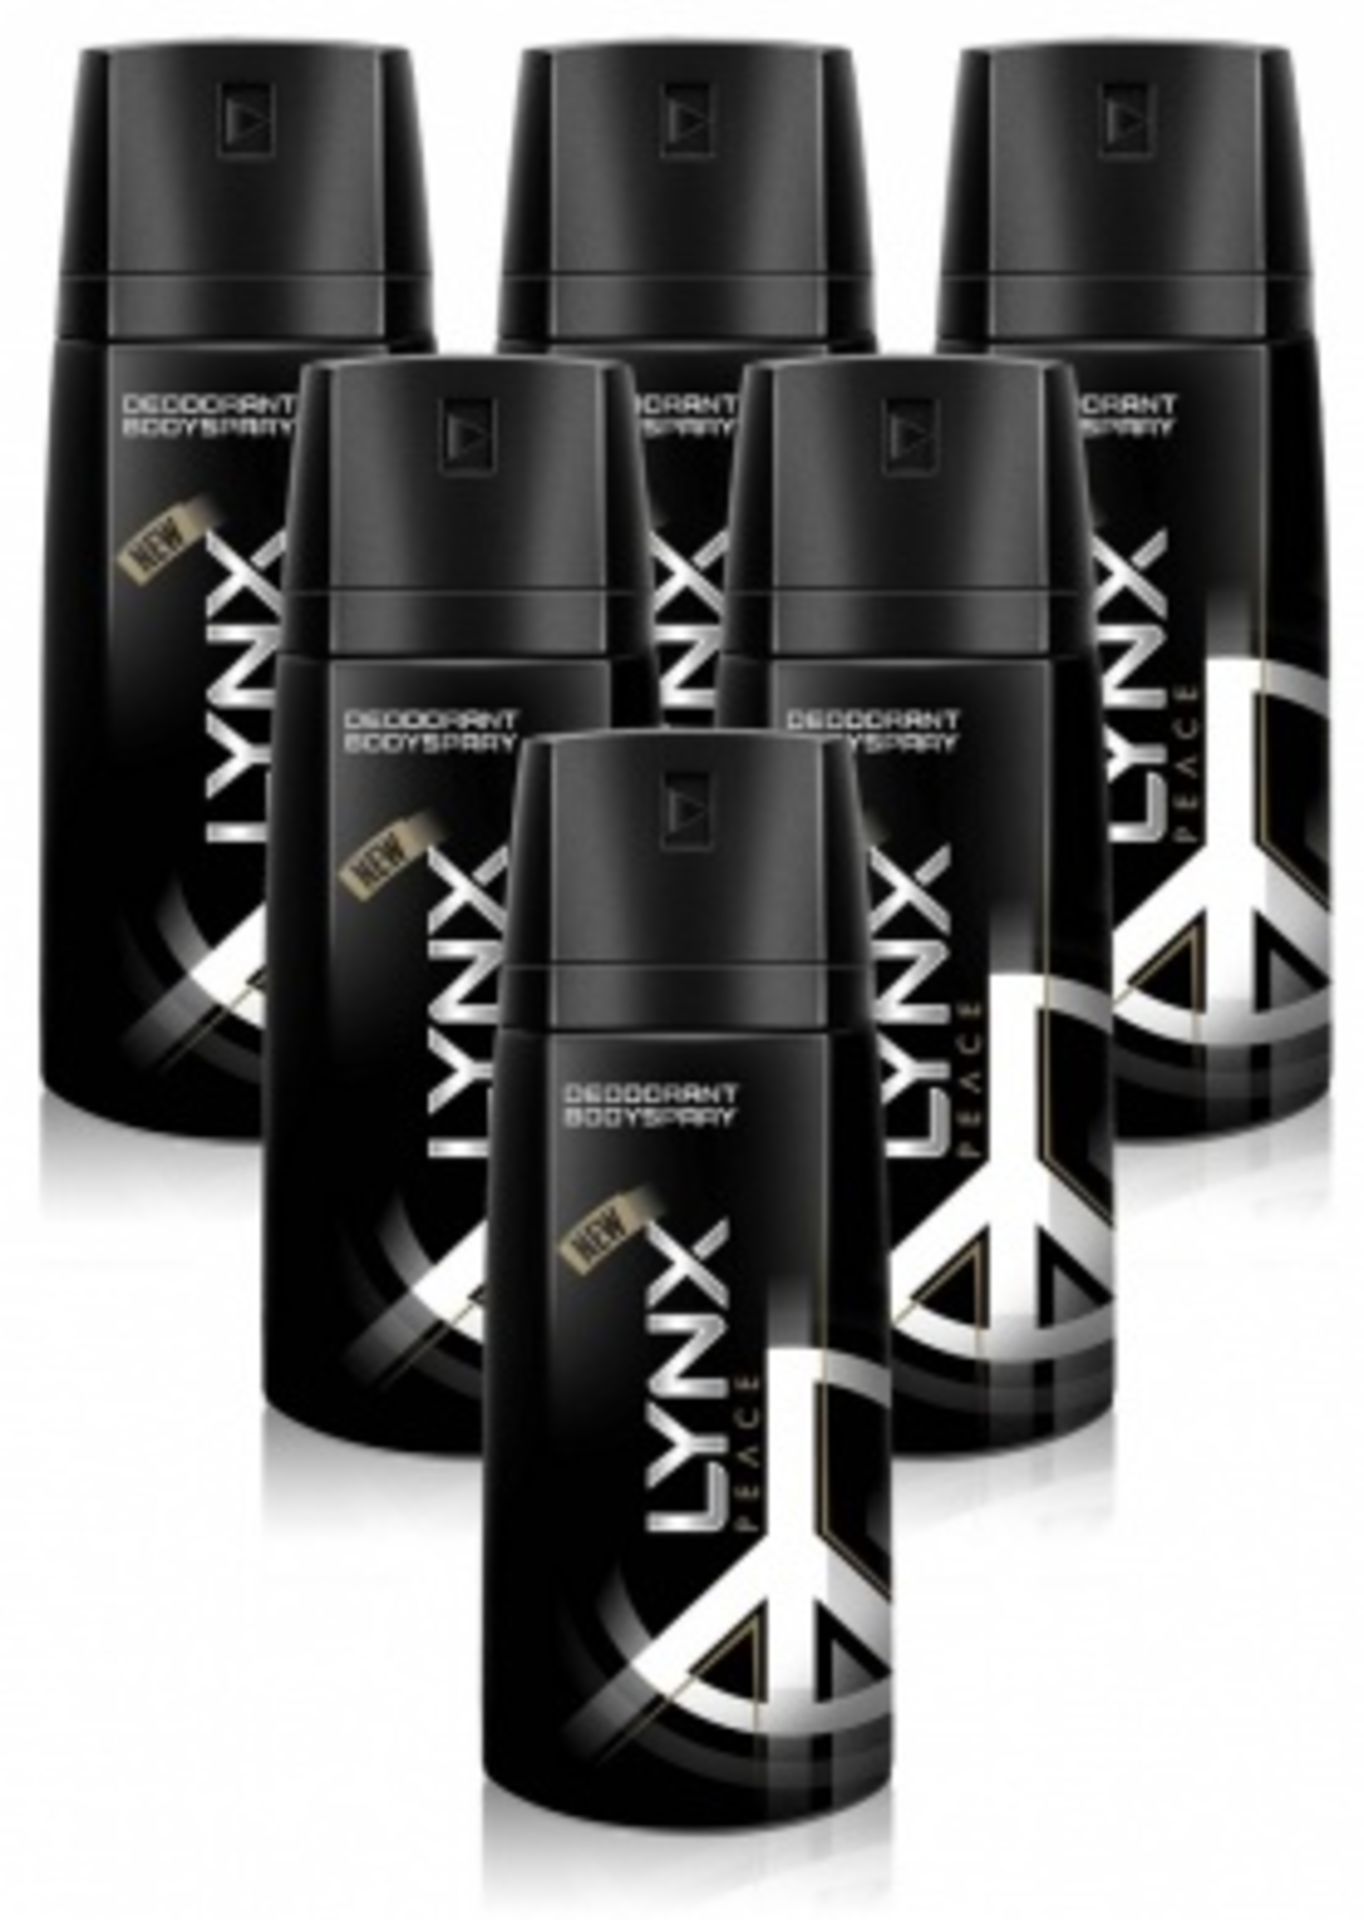 V Brand New 6 x Lynx (Axe) Peace Deodorant Body Spray 150ml Total ISP For 6 £18.90 (Picture shows - Image 4 of 4